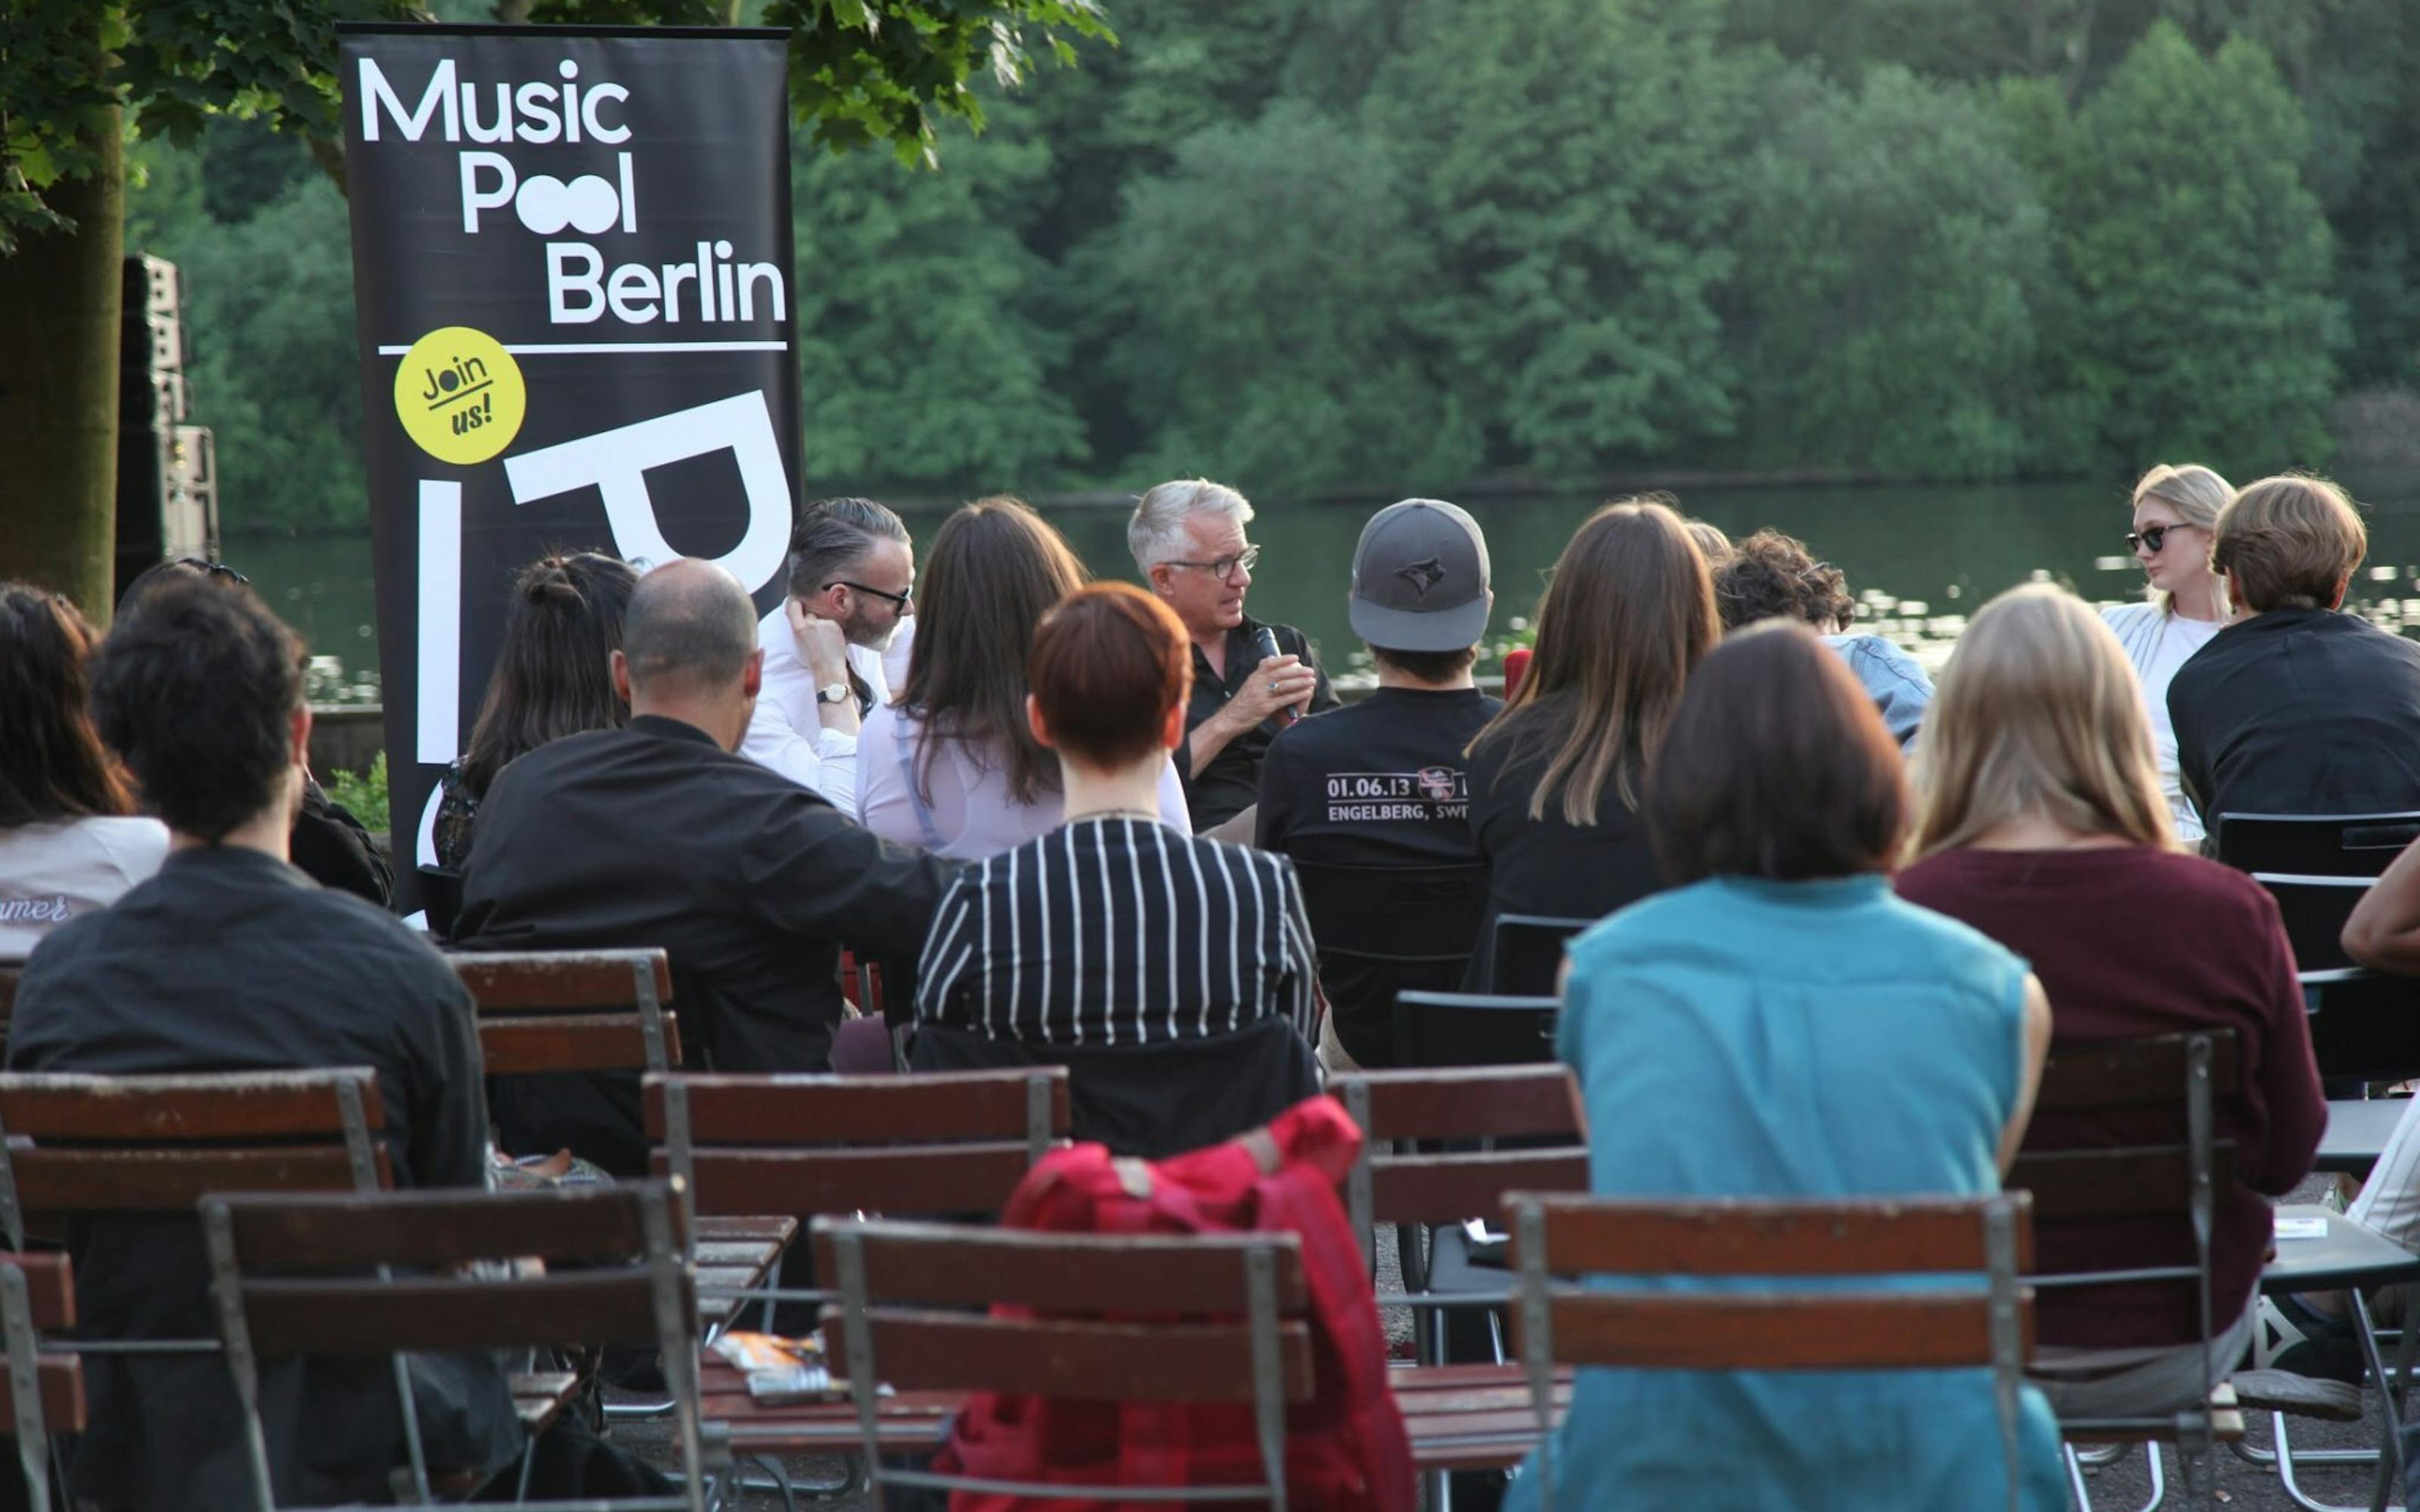 2018 music mental health panel talk by dBs Berlin (now Catalyst) and Music Pool Berlin